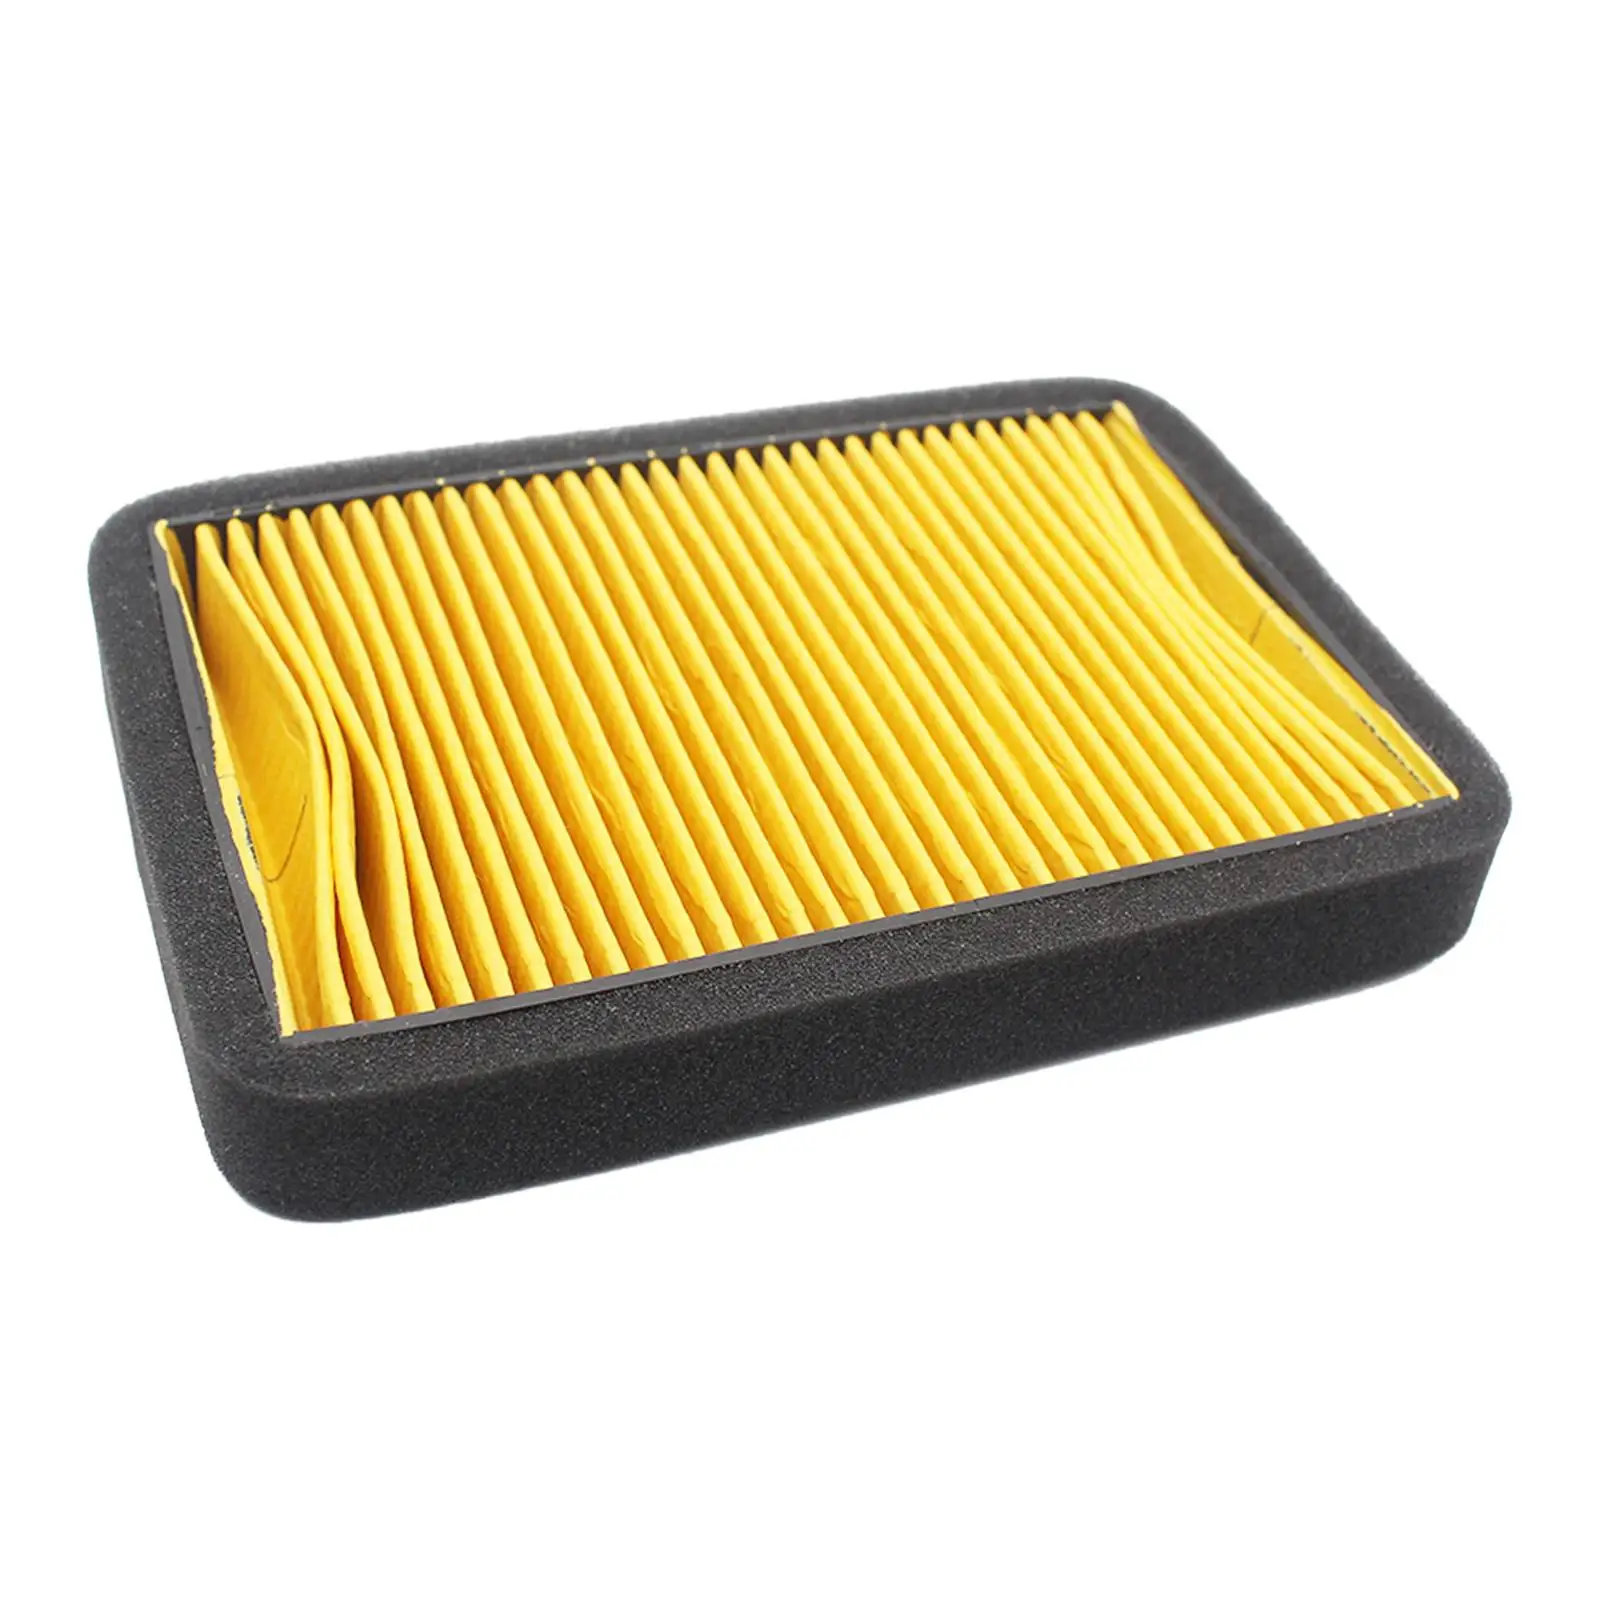 Air Filter Bj150-29A-29B Direct Replaces Fits for 150cc 500cc Tnt150